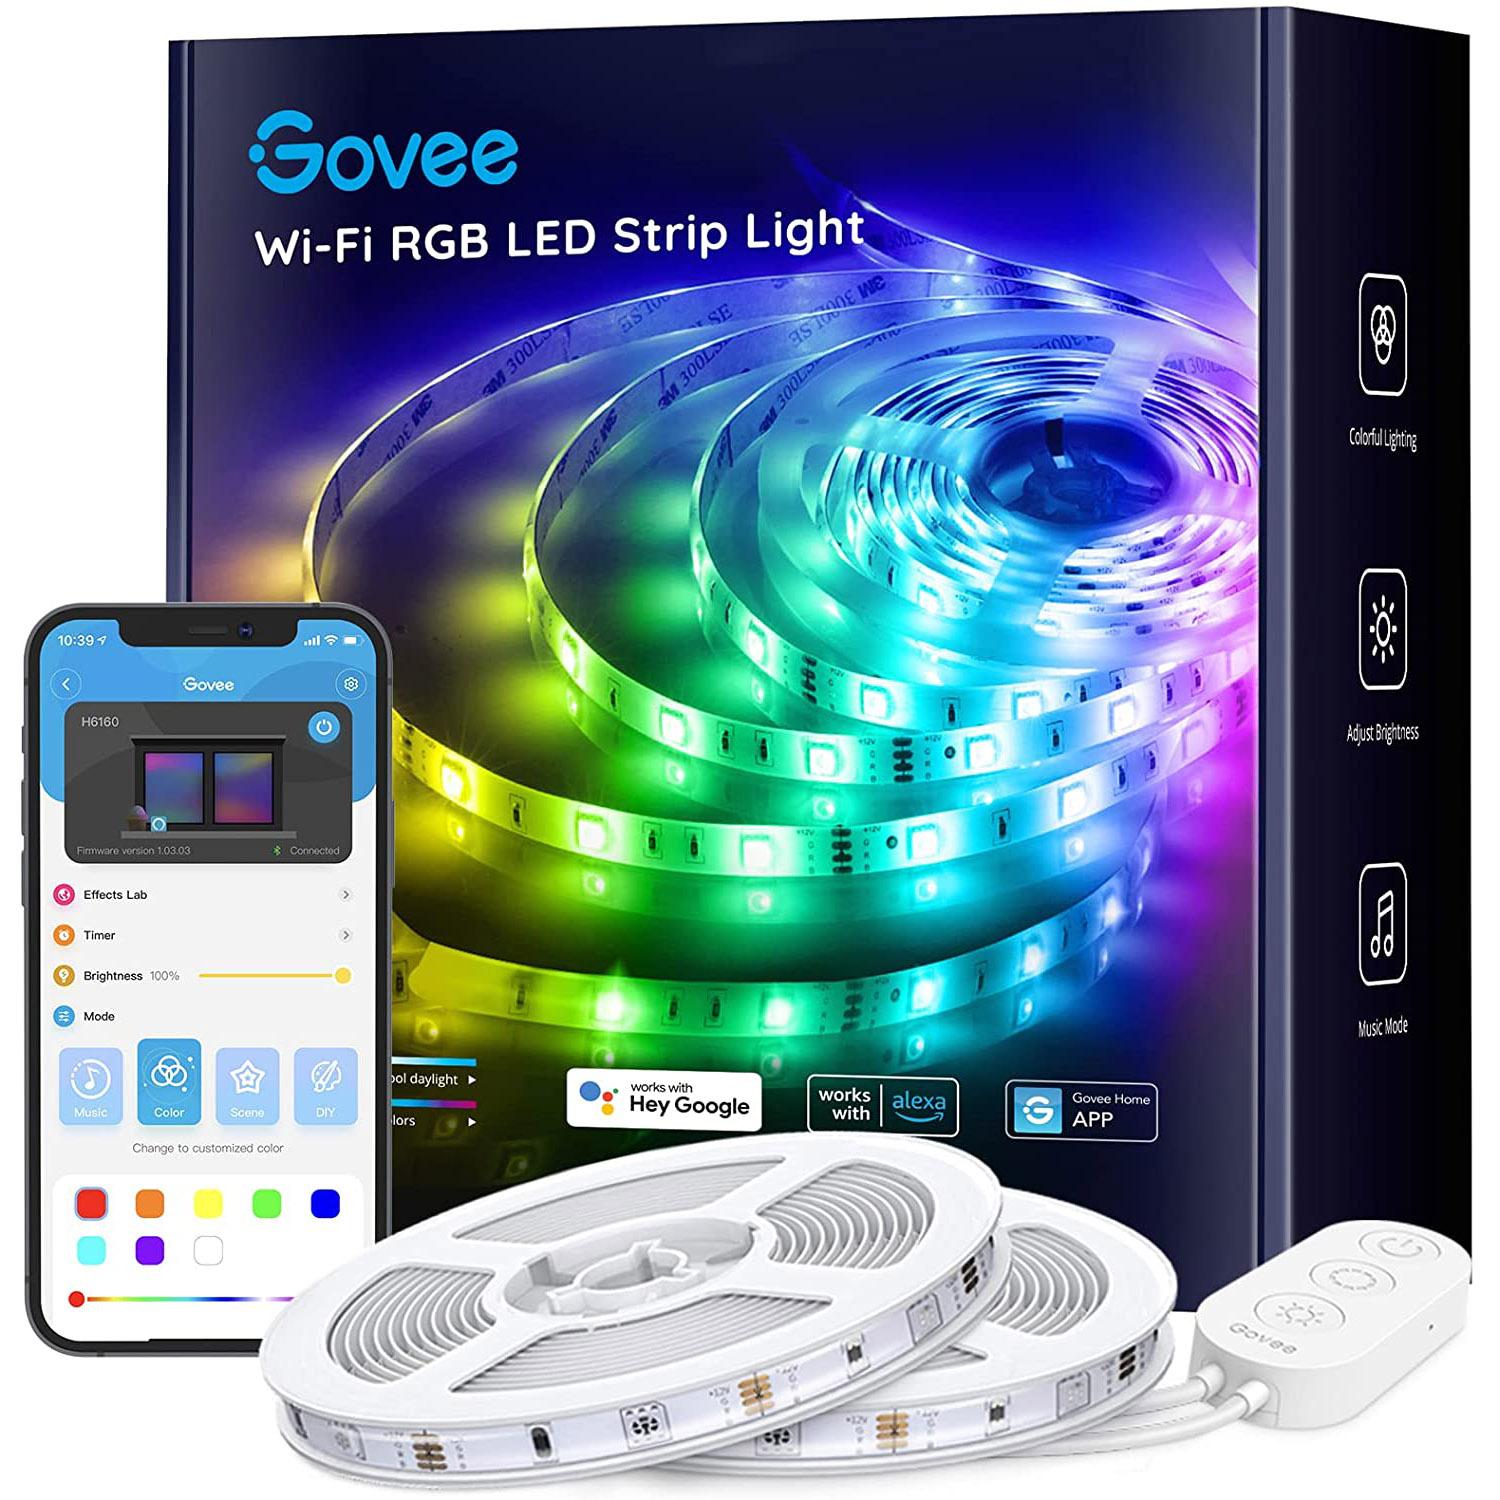 Govee Smart RGBIC WiFi LED Light Strips for $15.99 Shipped